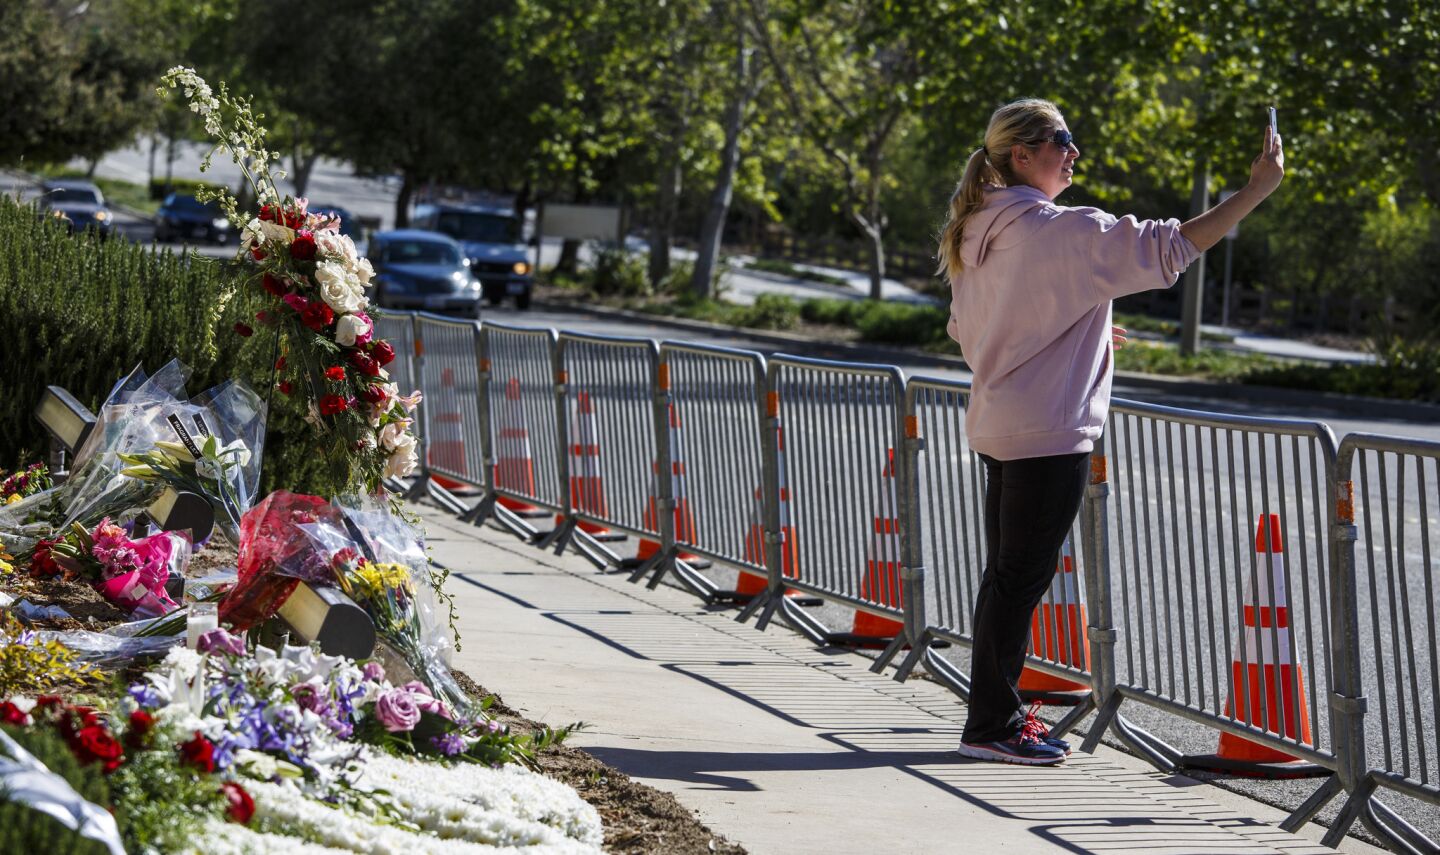 A woman takes a selfie at the entrance to the Ronal Reagan Presidential Library waiting for the motorcade bringing Nancy Reagan's body to lie in repose.